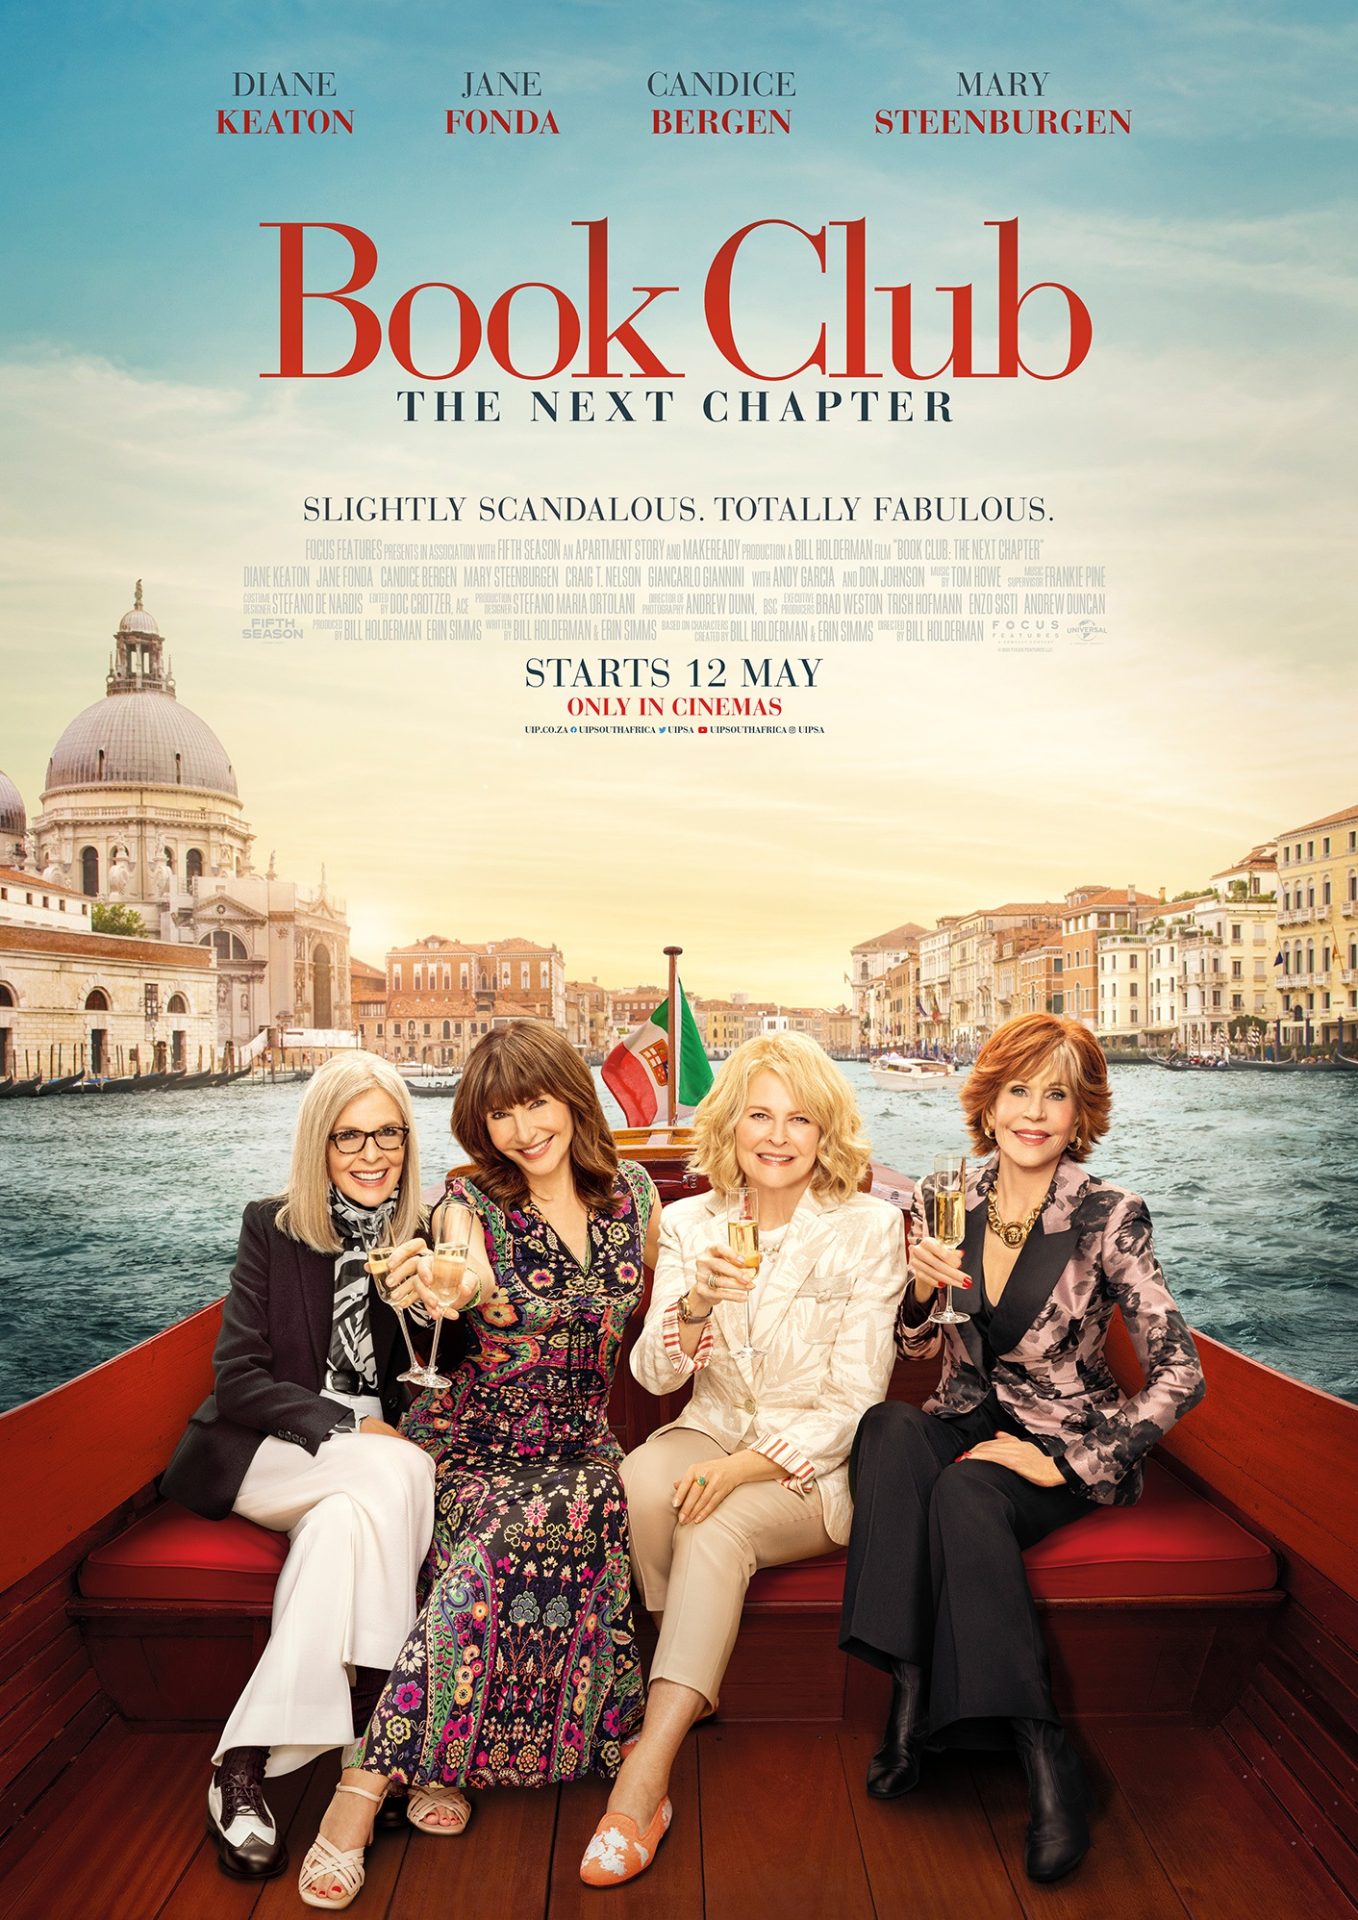 Grab your girlfriends, Book Club: The Next Chapter opens in cinemas this Friday 2